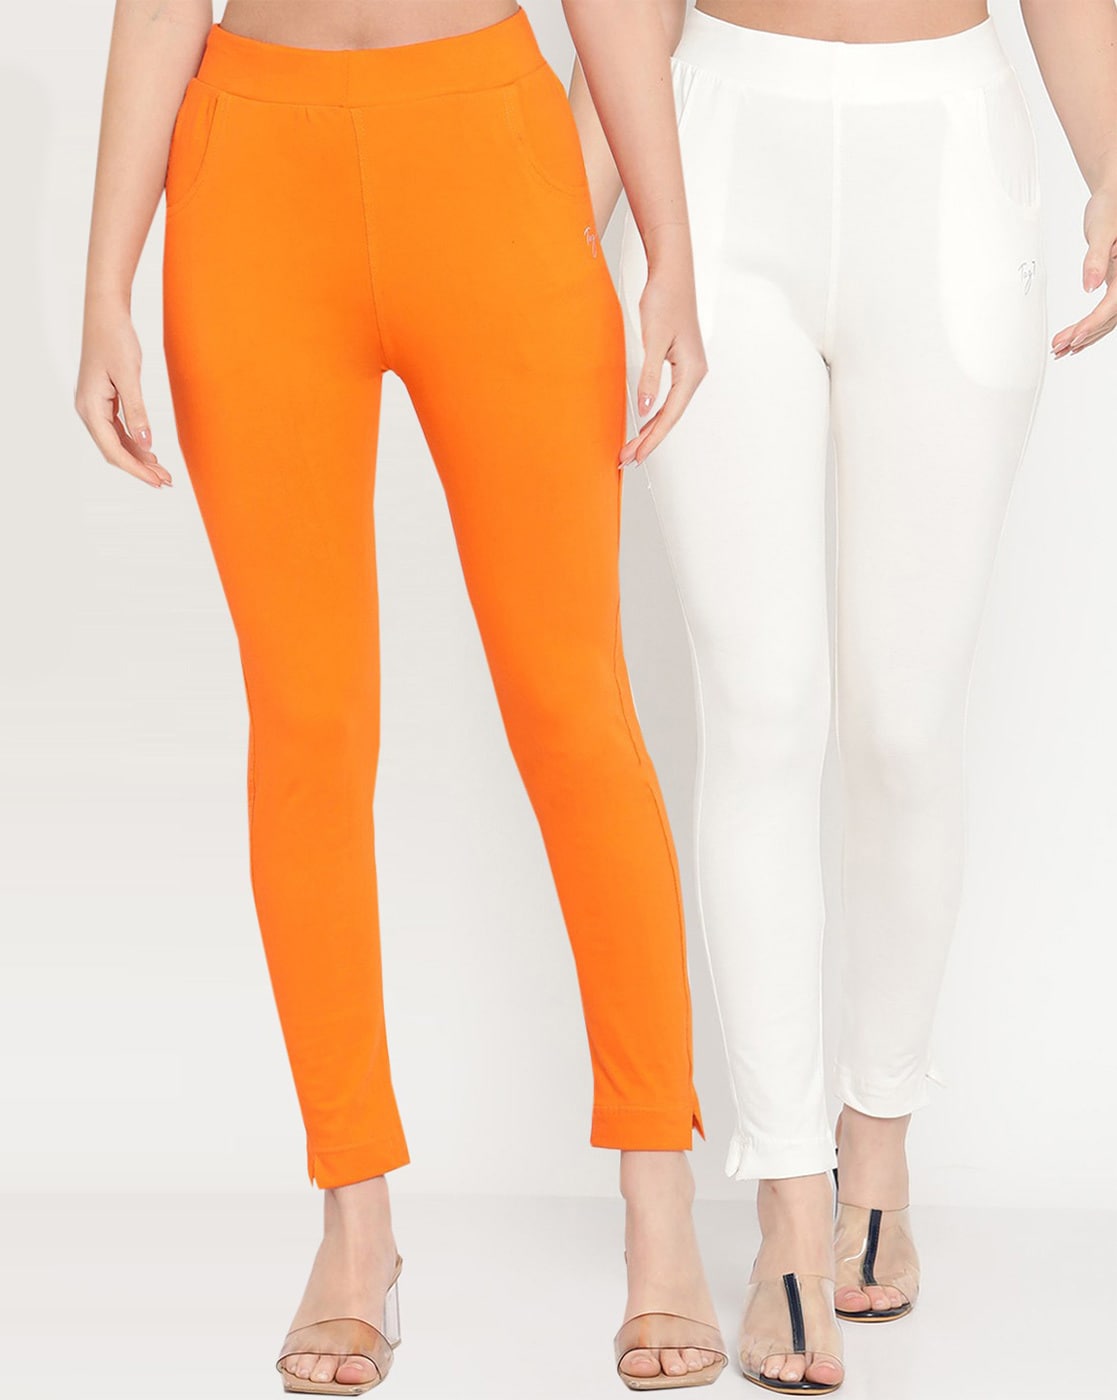 Pack of 2 Ankle-Length Leggings with Elasticated Waist